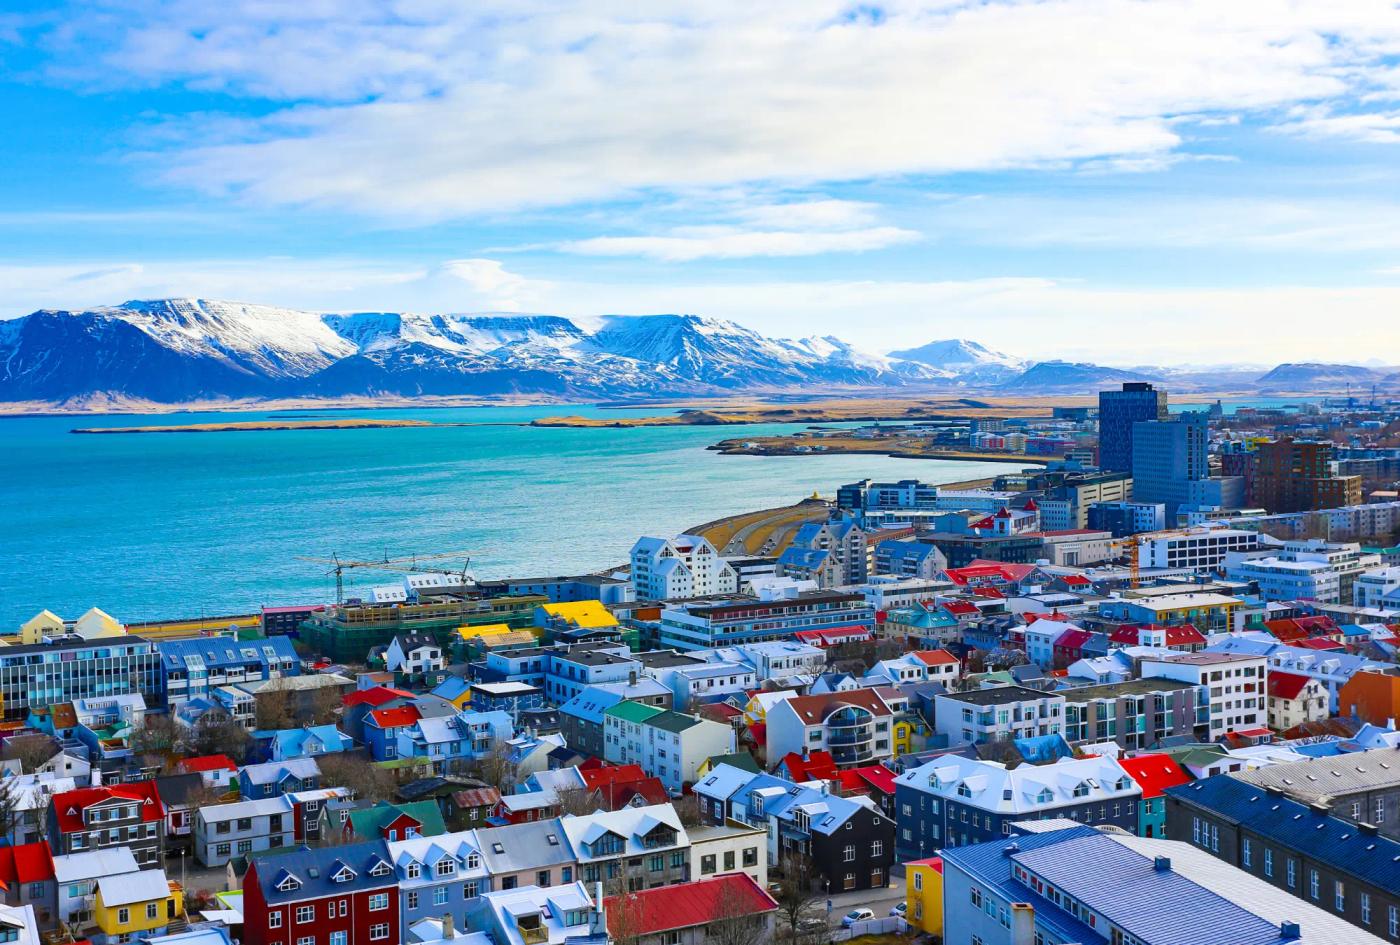 A photograph showing the city of Reykjavik beside the water with mountains in the background